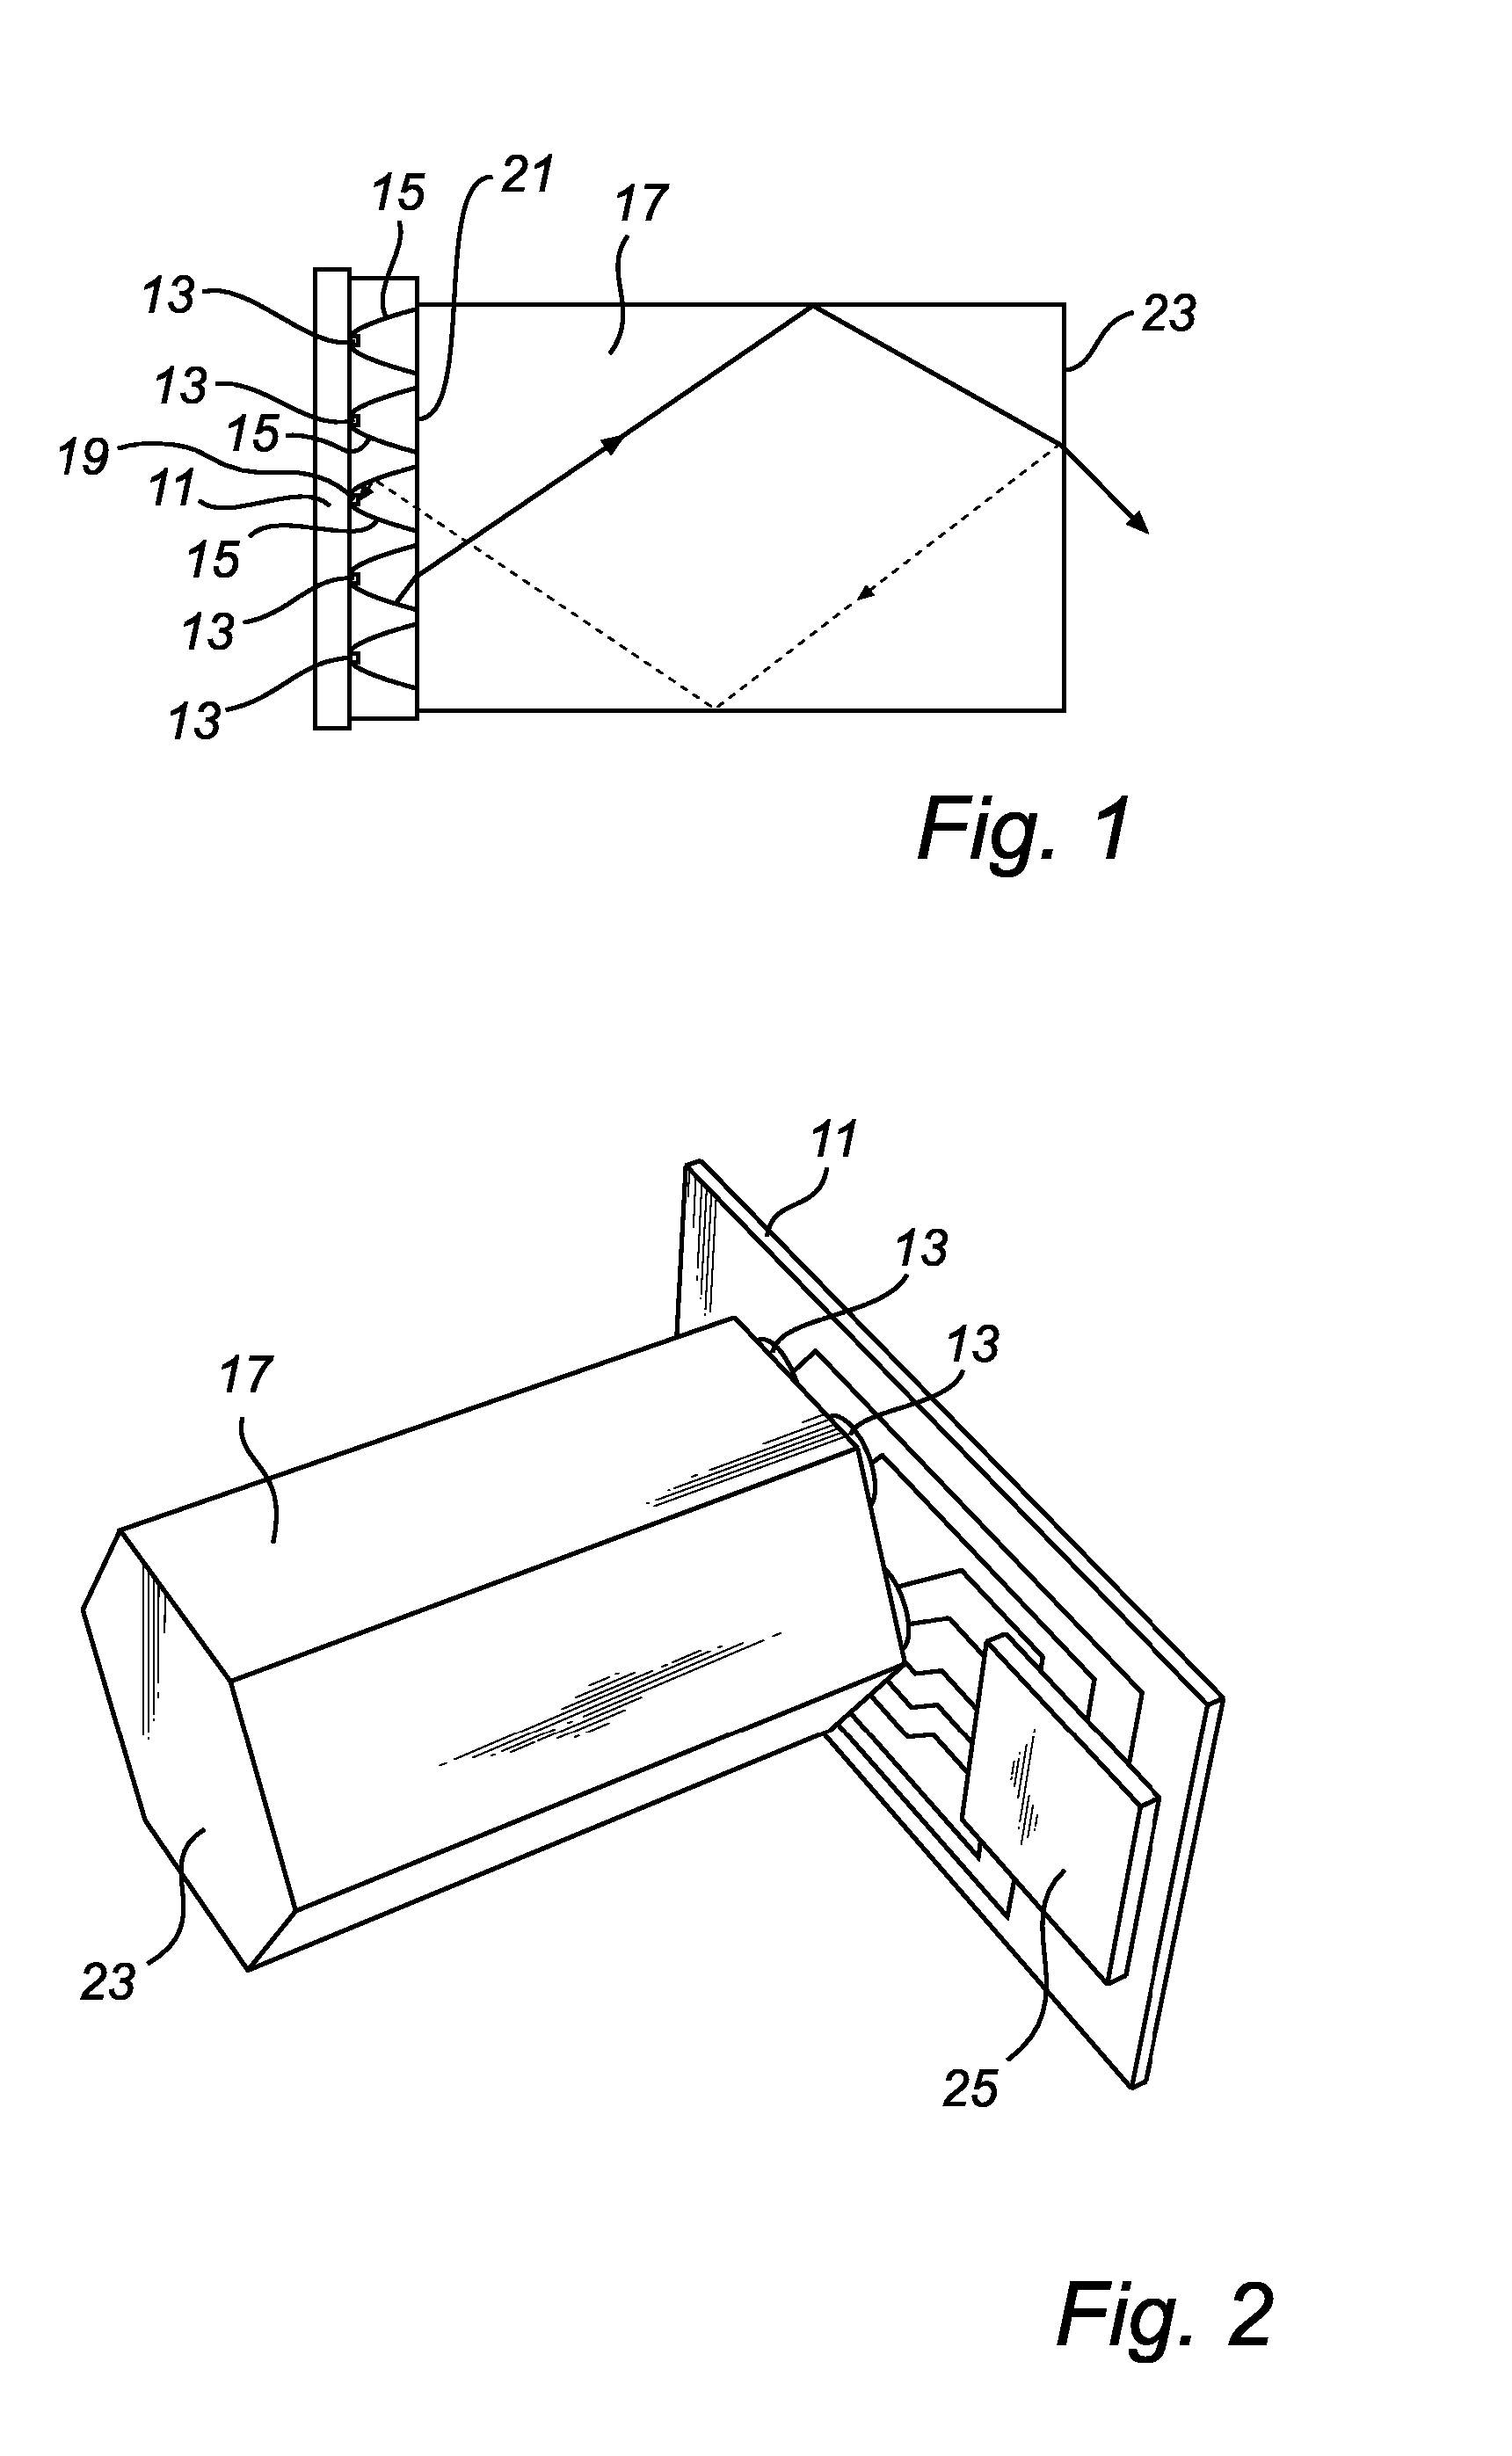 Feedback controlled illumination system having an array of leds, and a detector among the leds